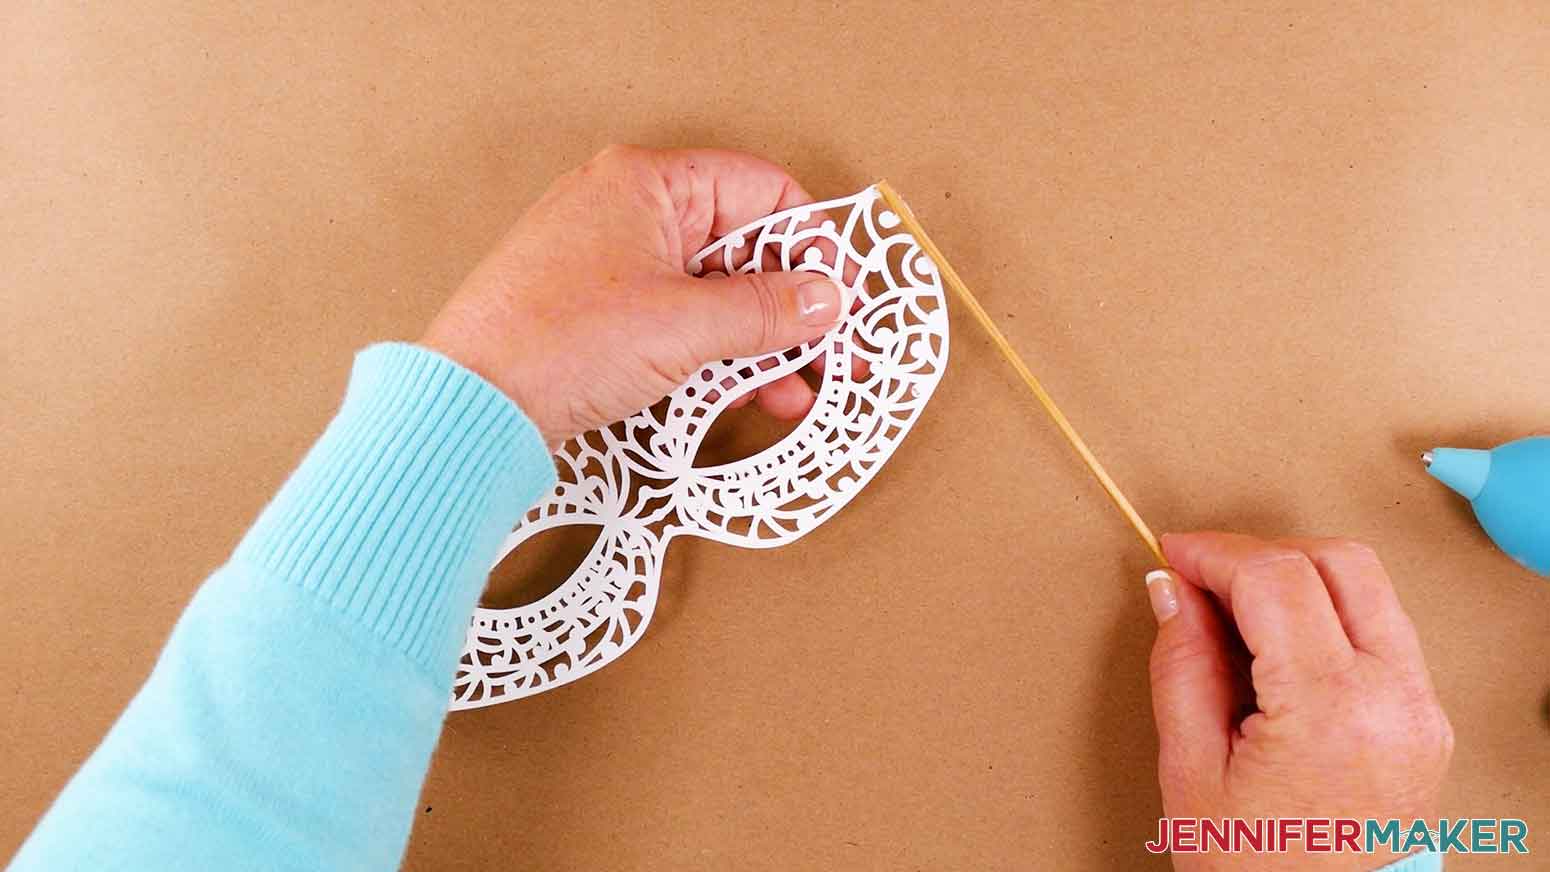 Use hot glue to adhere wooden dowel to masquerade mask.